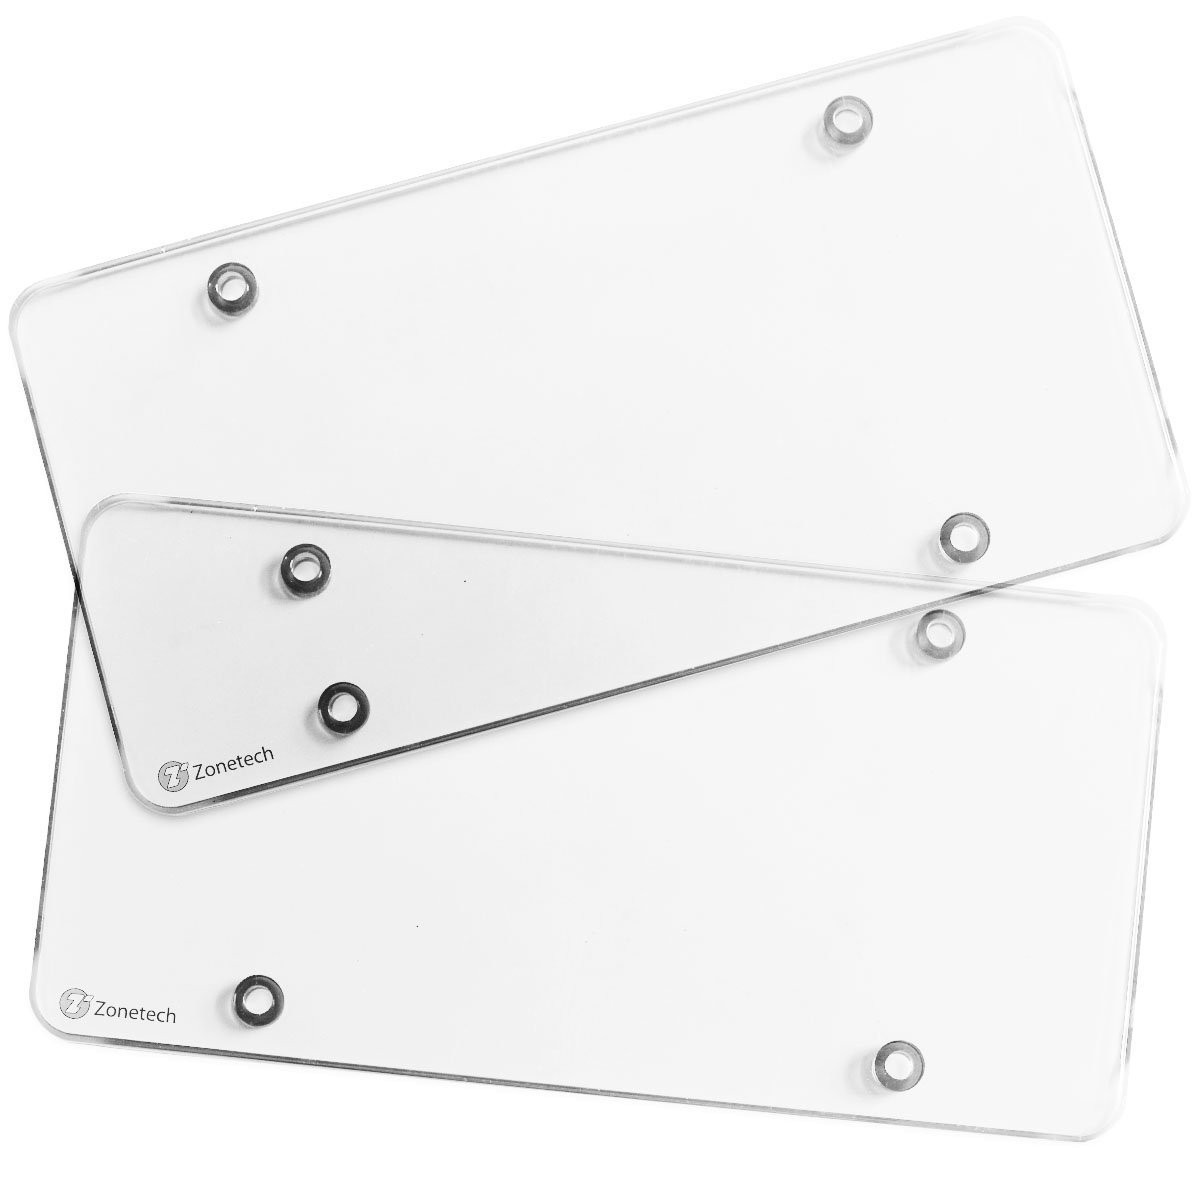 Zone Tech Clear License Plate Shields - 2-Pack Novelty/License Plate Clear Flat Shields